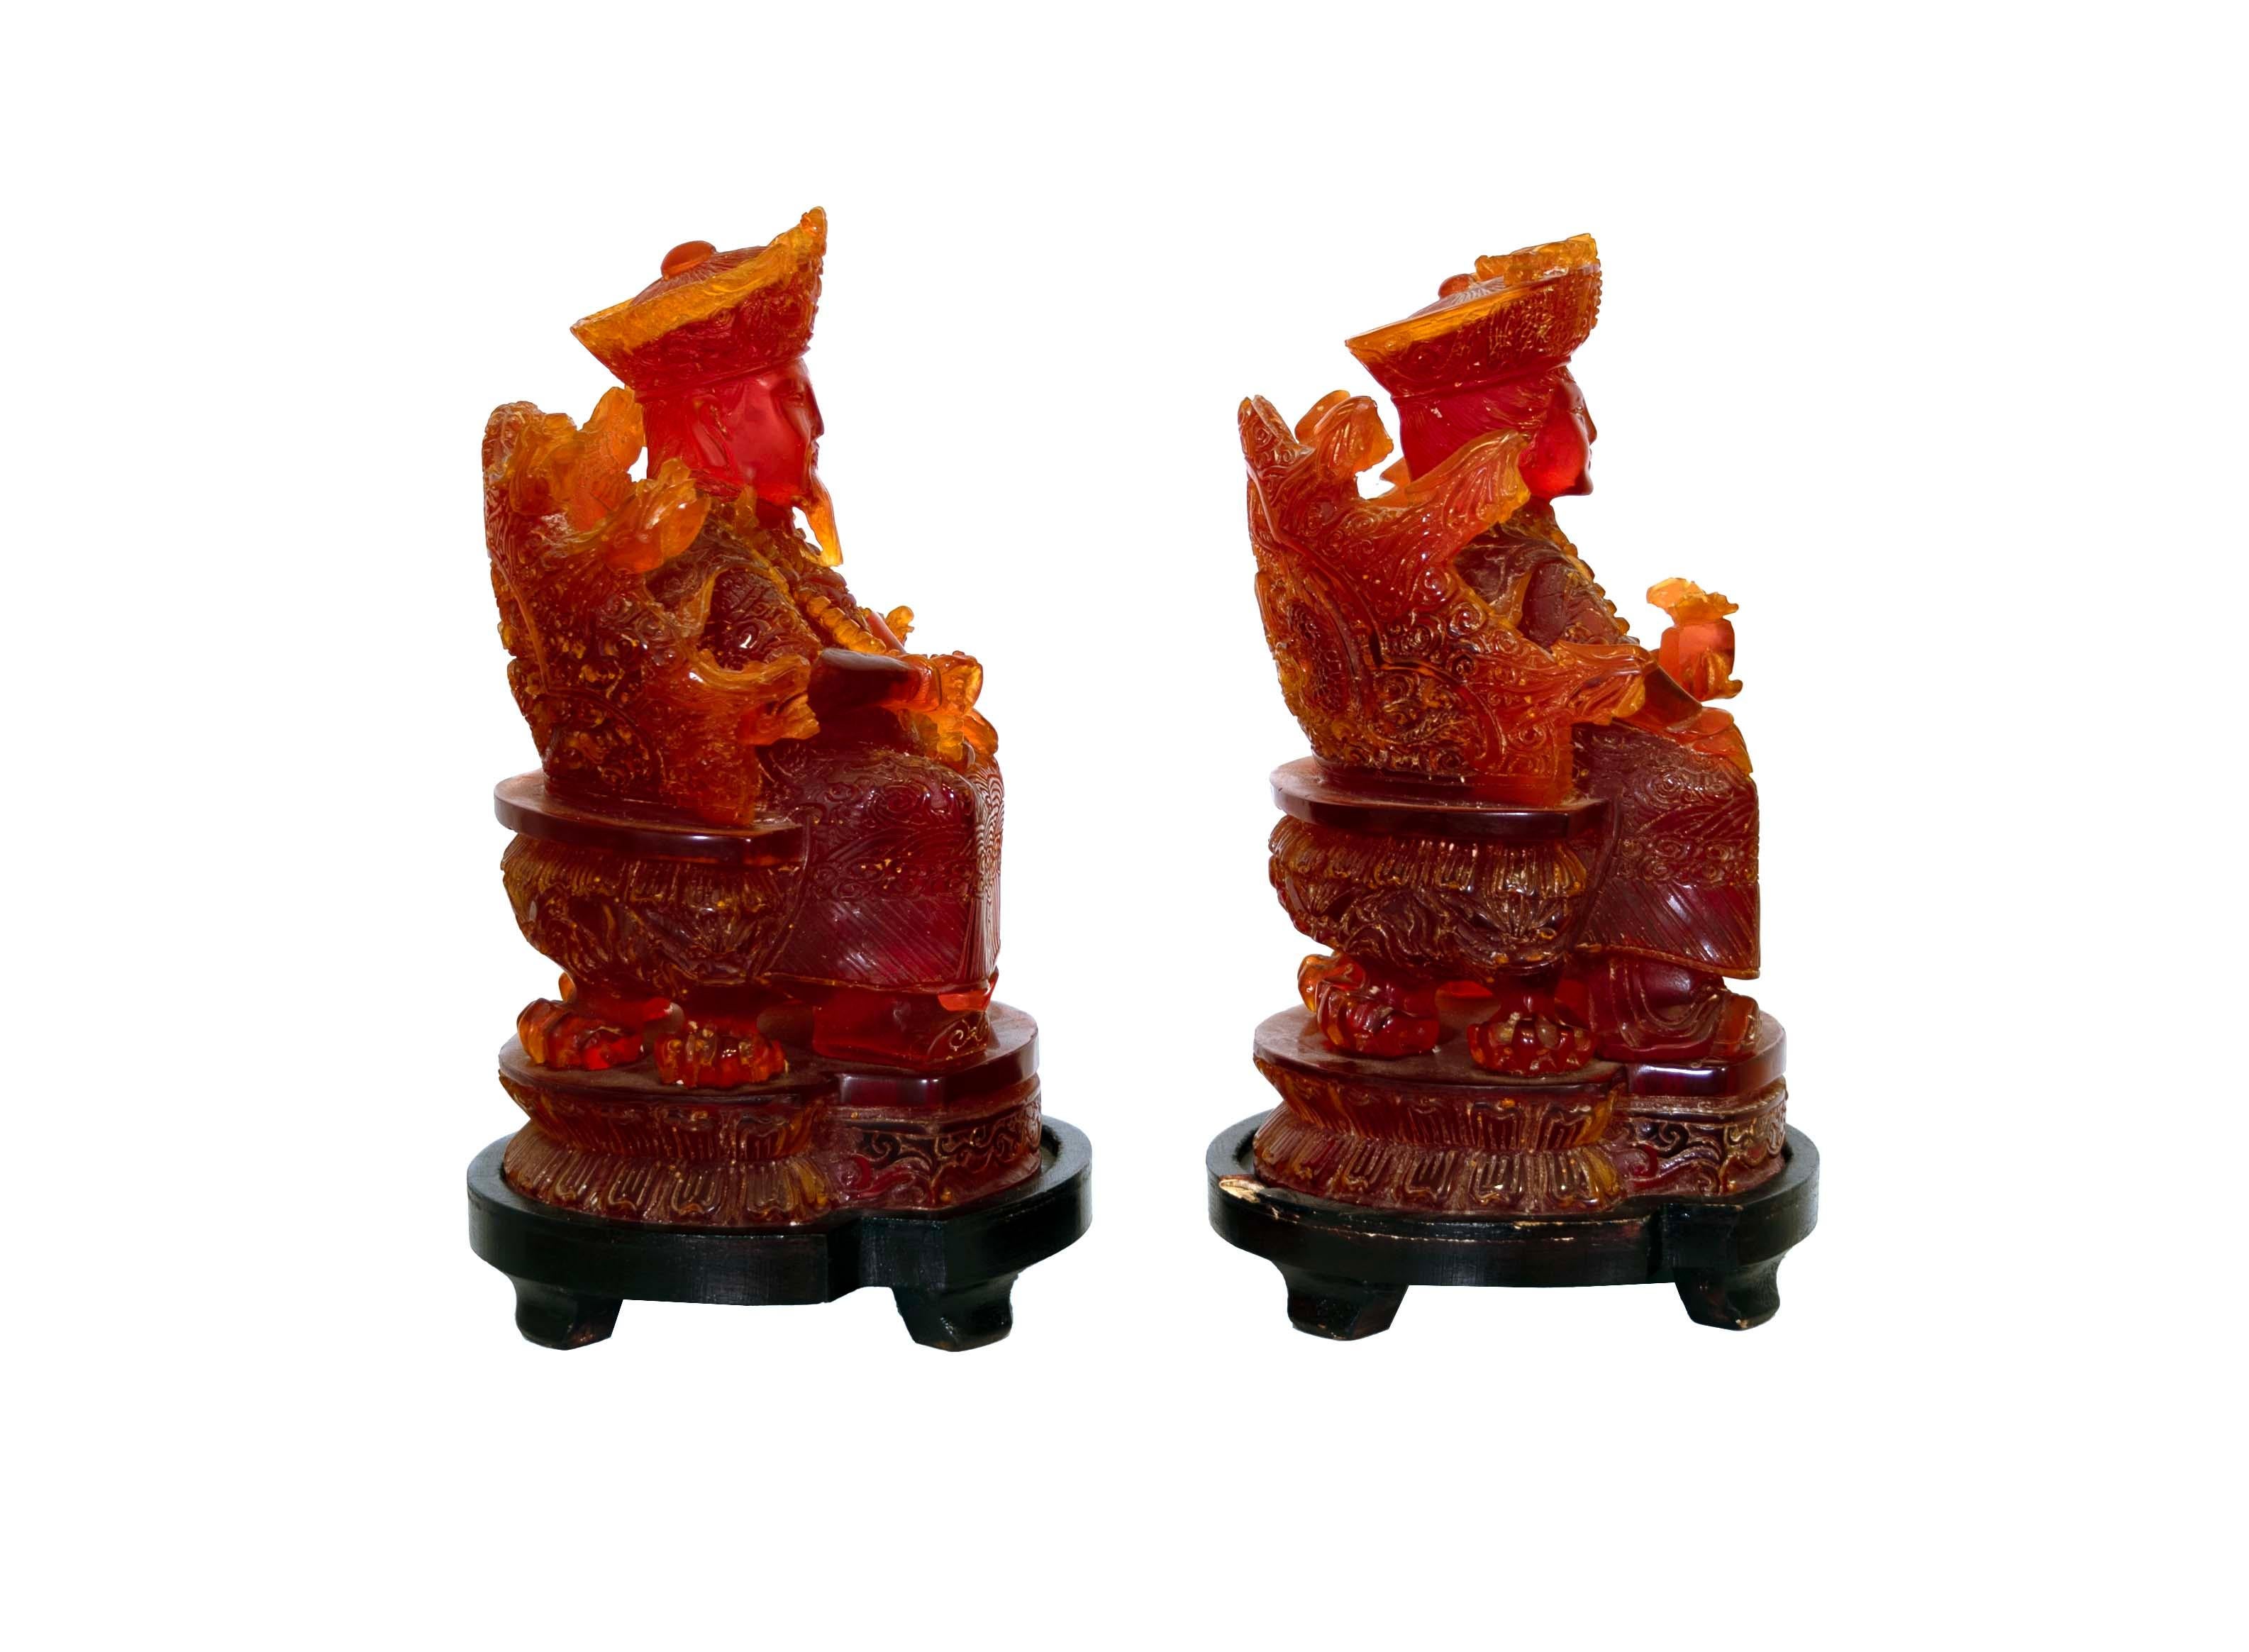 Pair of Seated Empire Chinese Man and Woman Cherry Resin on Wooden Bases In Good Condition For Sale In Keego Harbor, MI